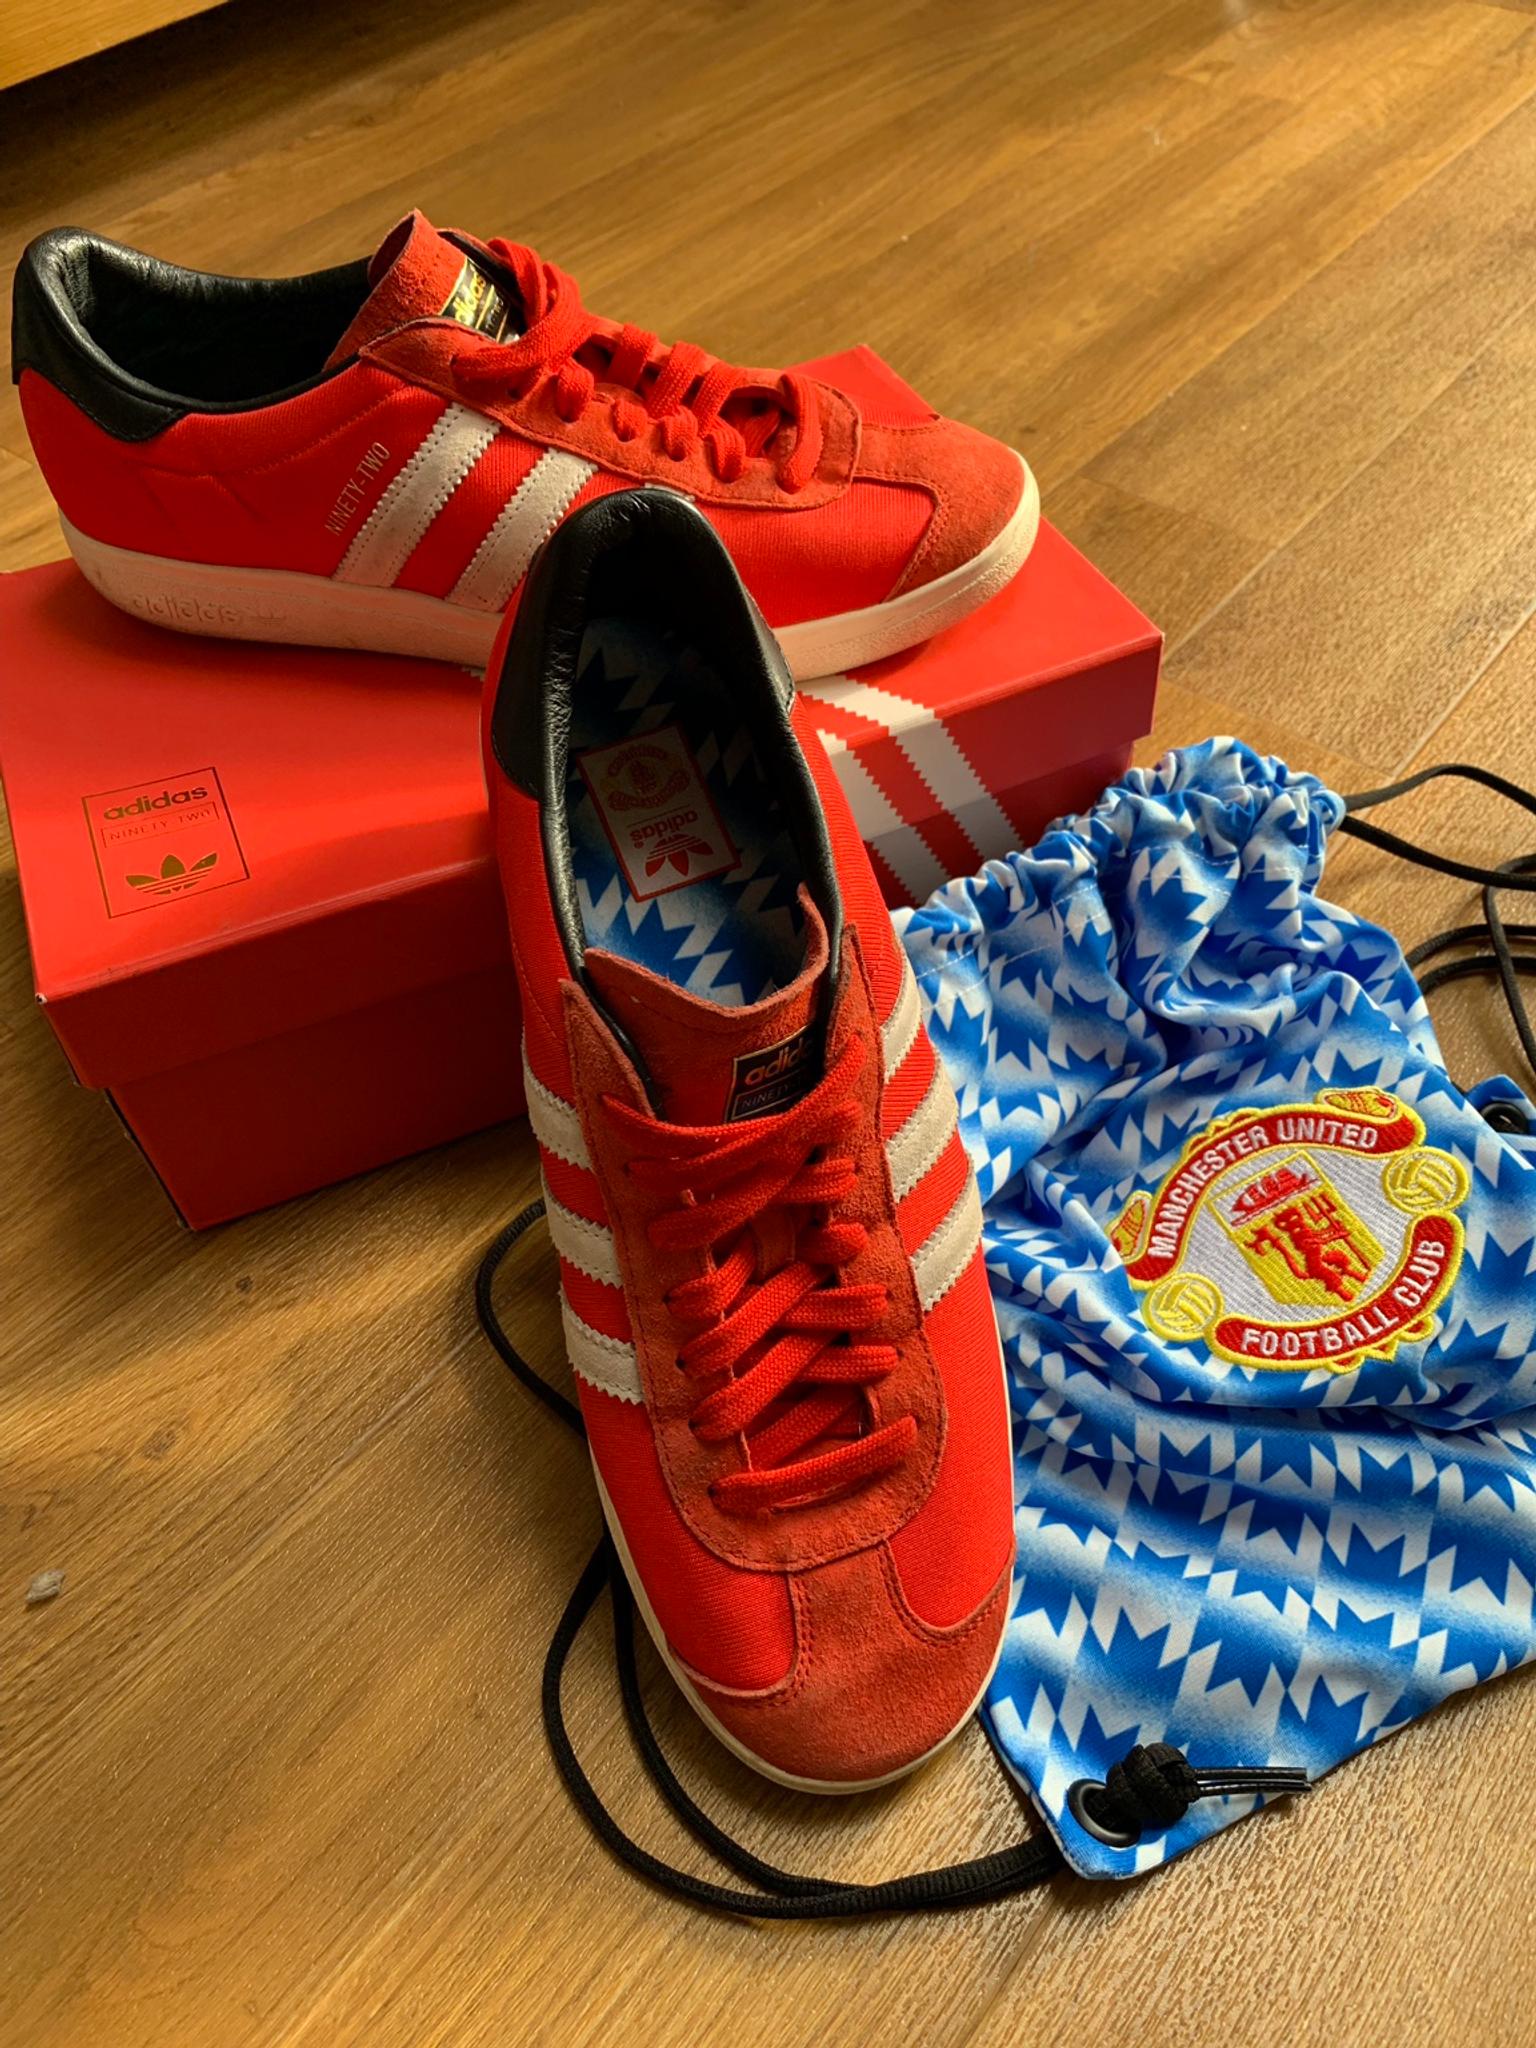 adidas class of 92 sneakers